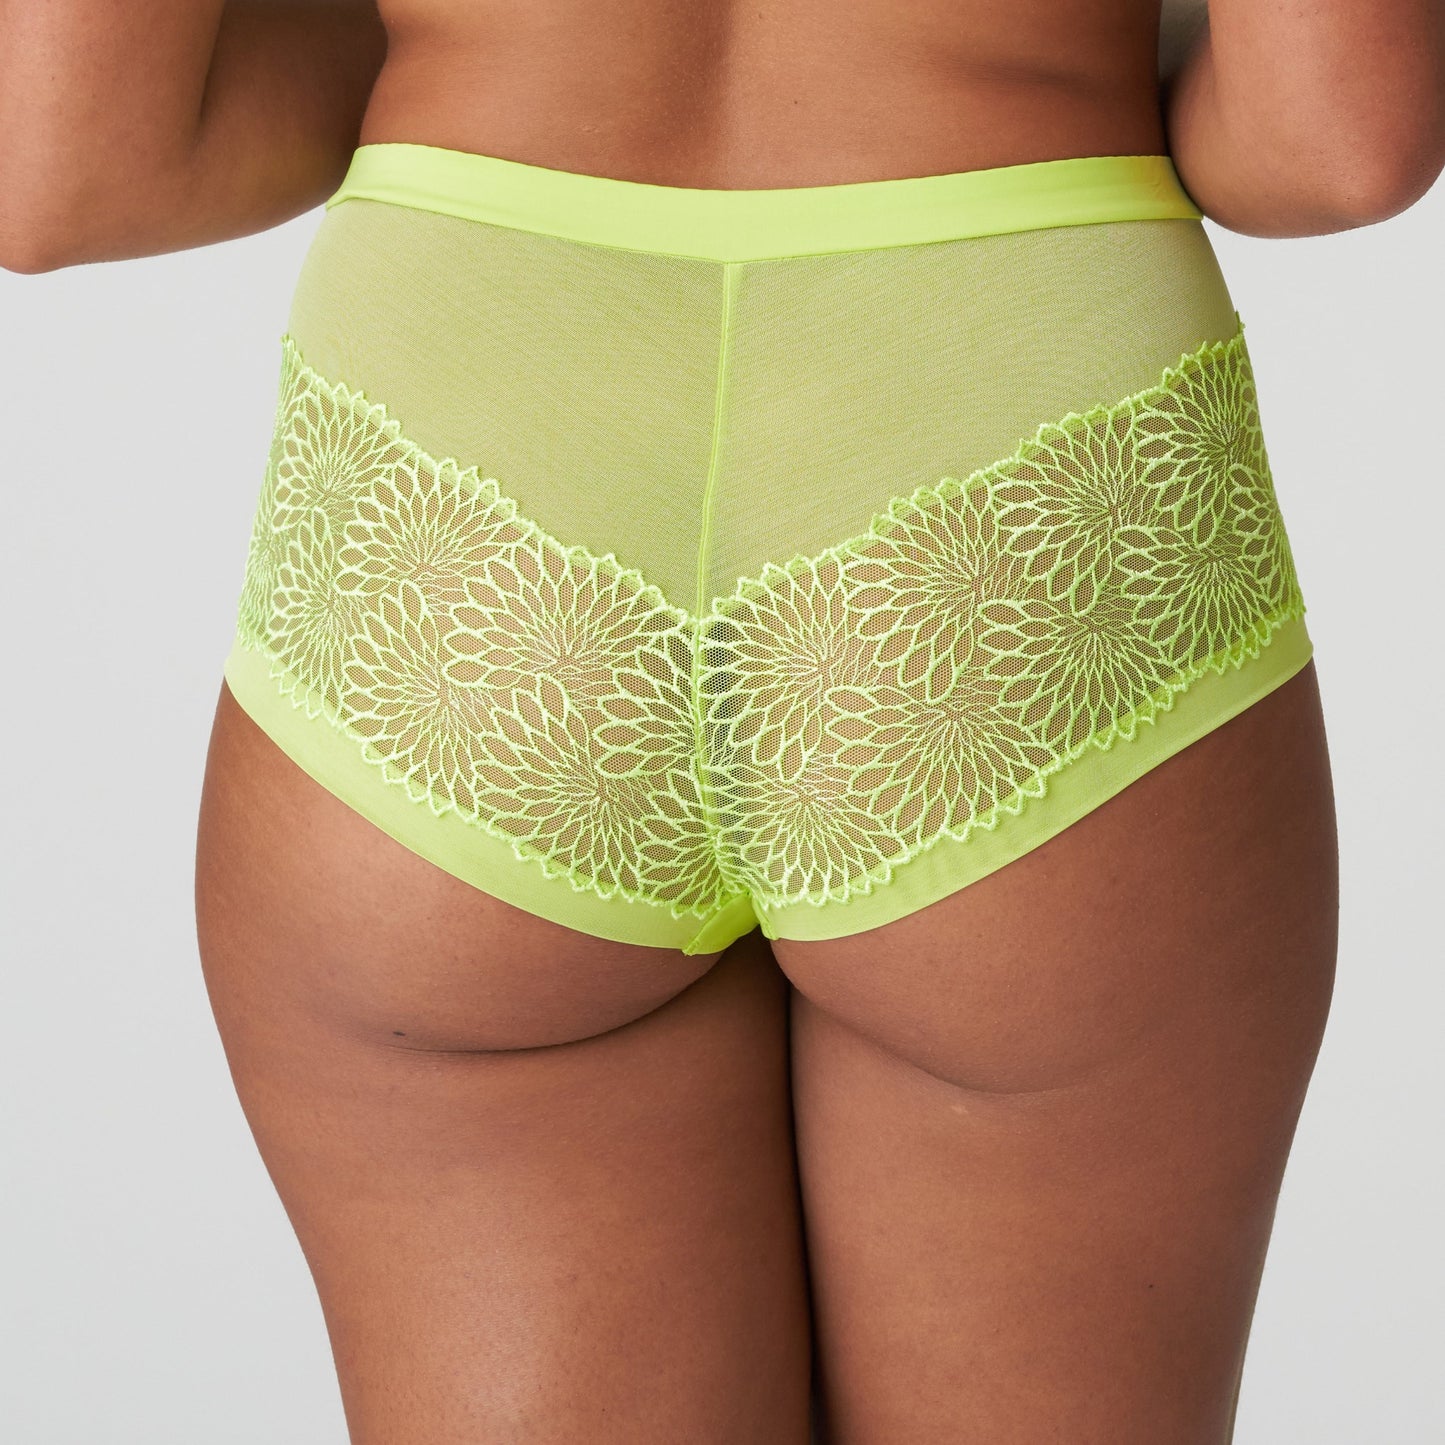 Back view of a woman wearing the Sophora high-waisted cheeky panty in Lime Crush by PrimaDonna.